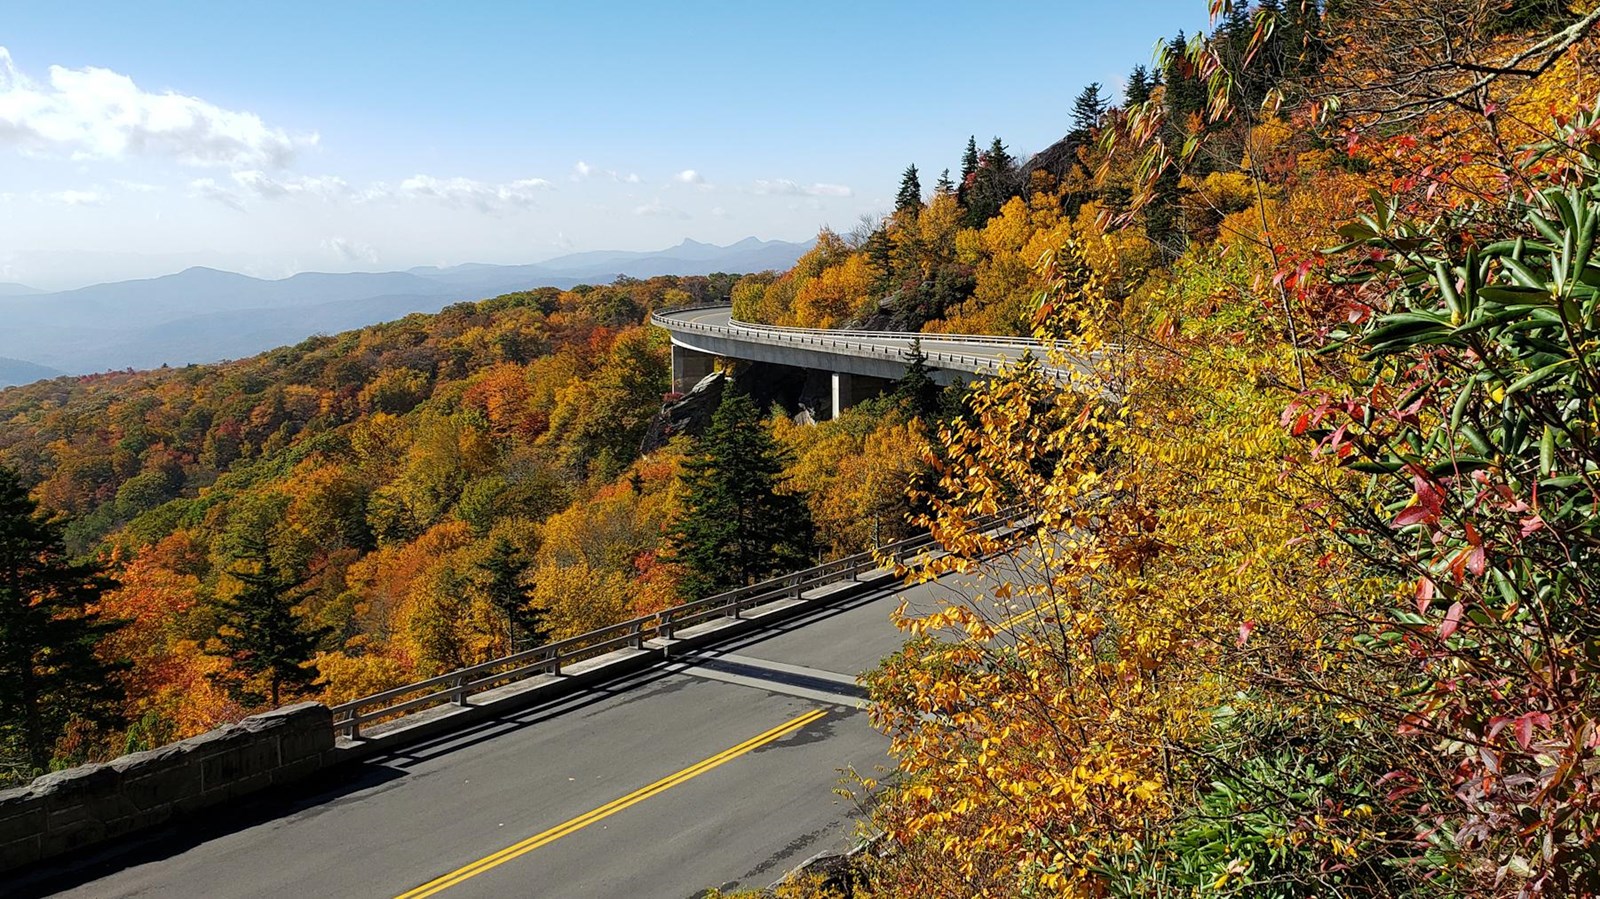 A roadway curves sinuously across a colorful fall landscape